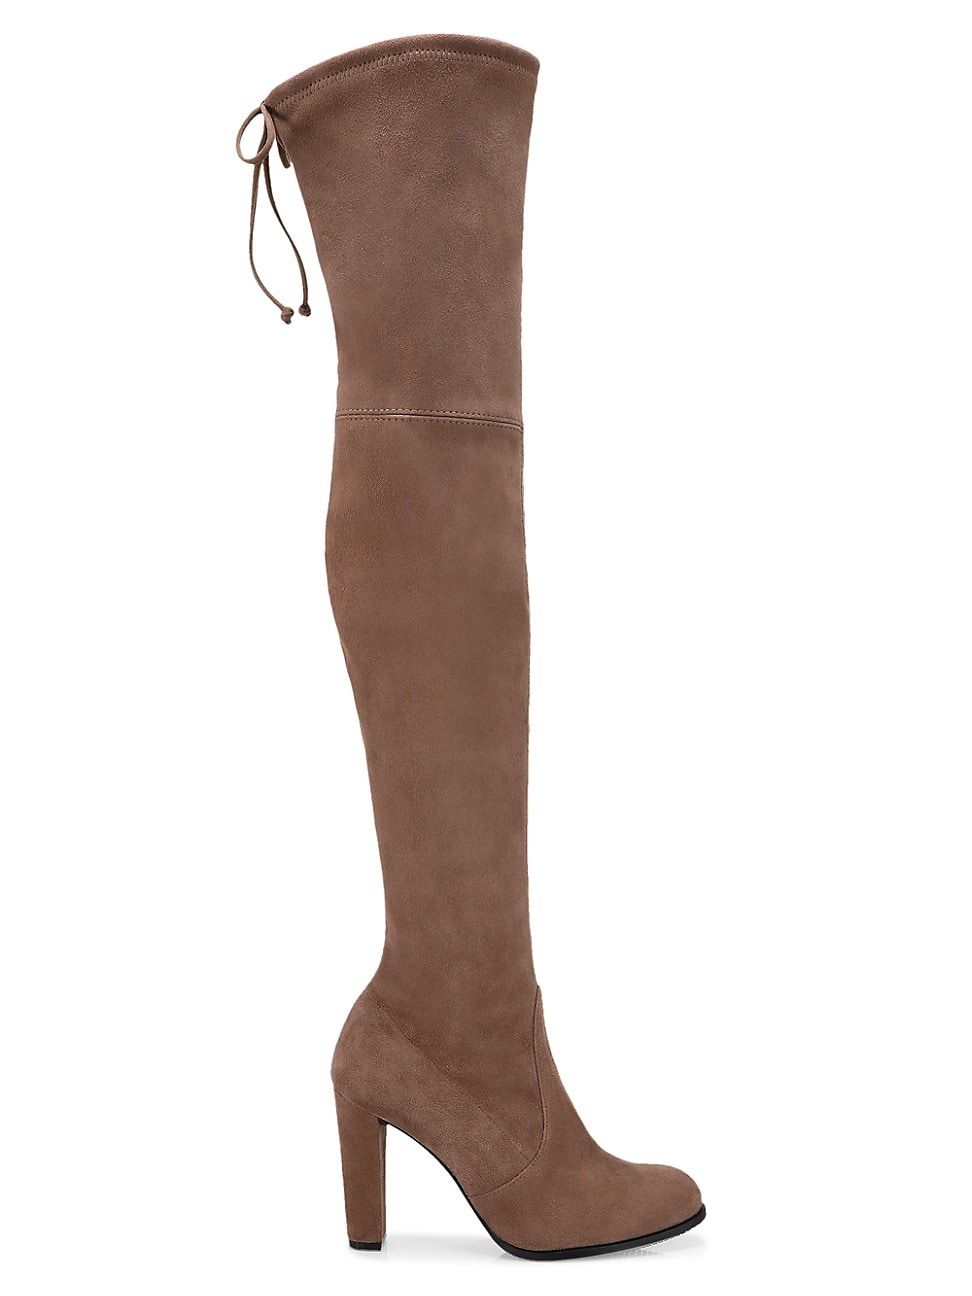 Women's Highland Over-The-Knee Suede Boots - Taupe - Size 8.5 | Saks Fifth Avenue